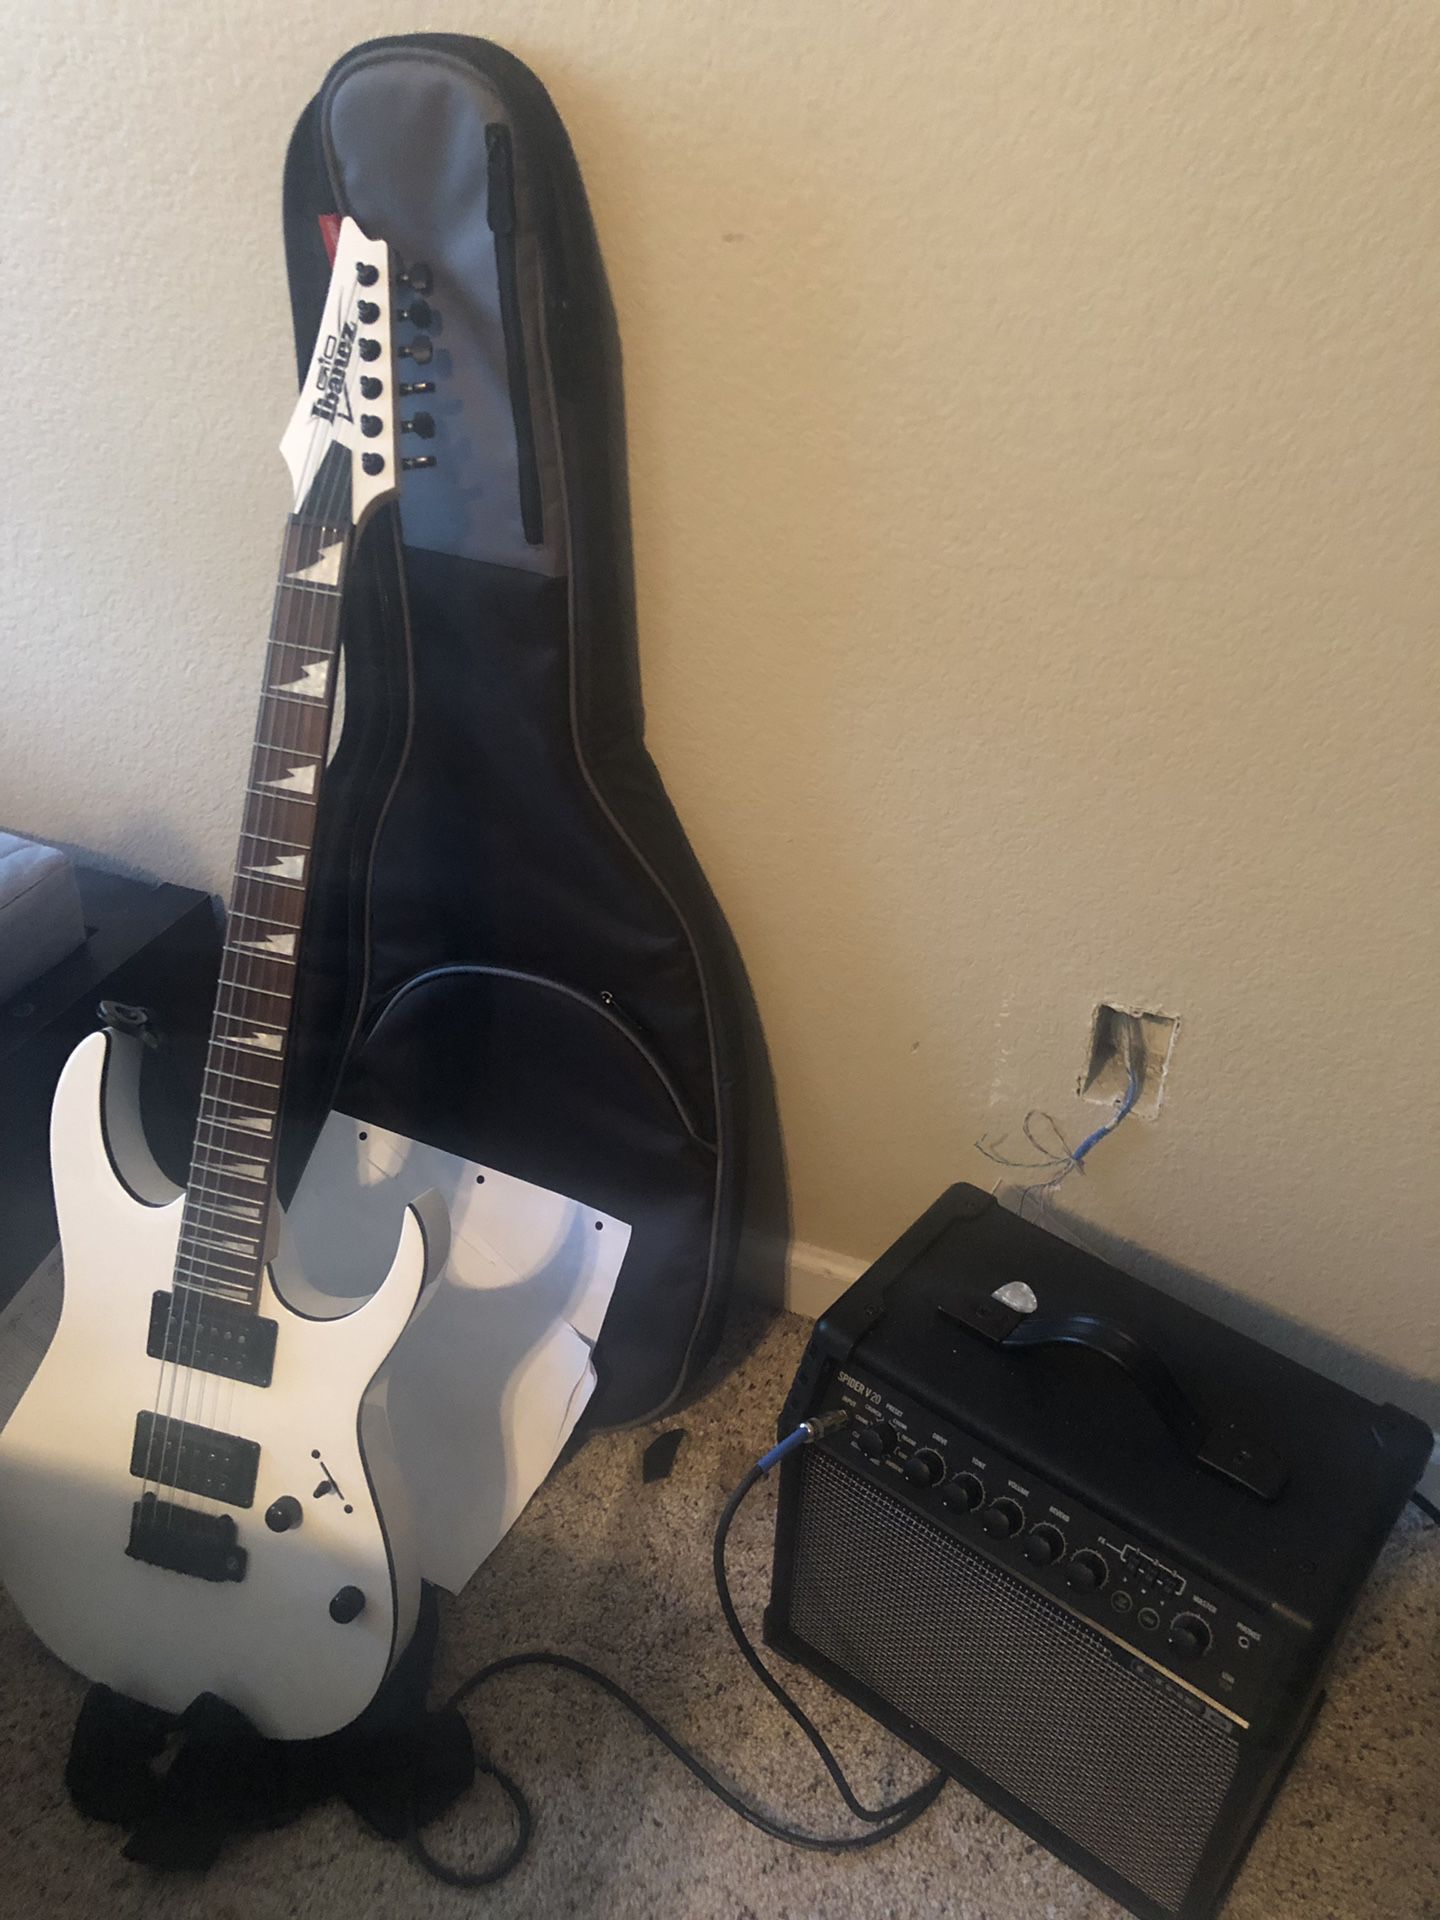 Ibanez electric guitar, case, and amp